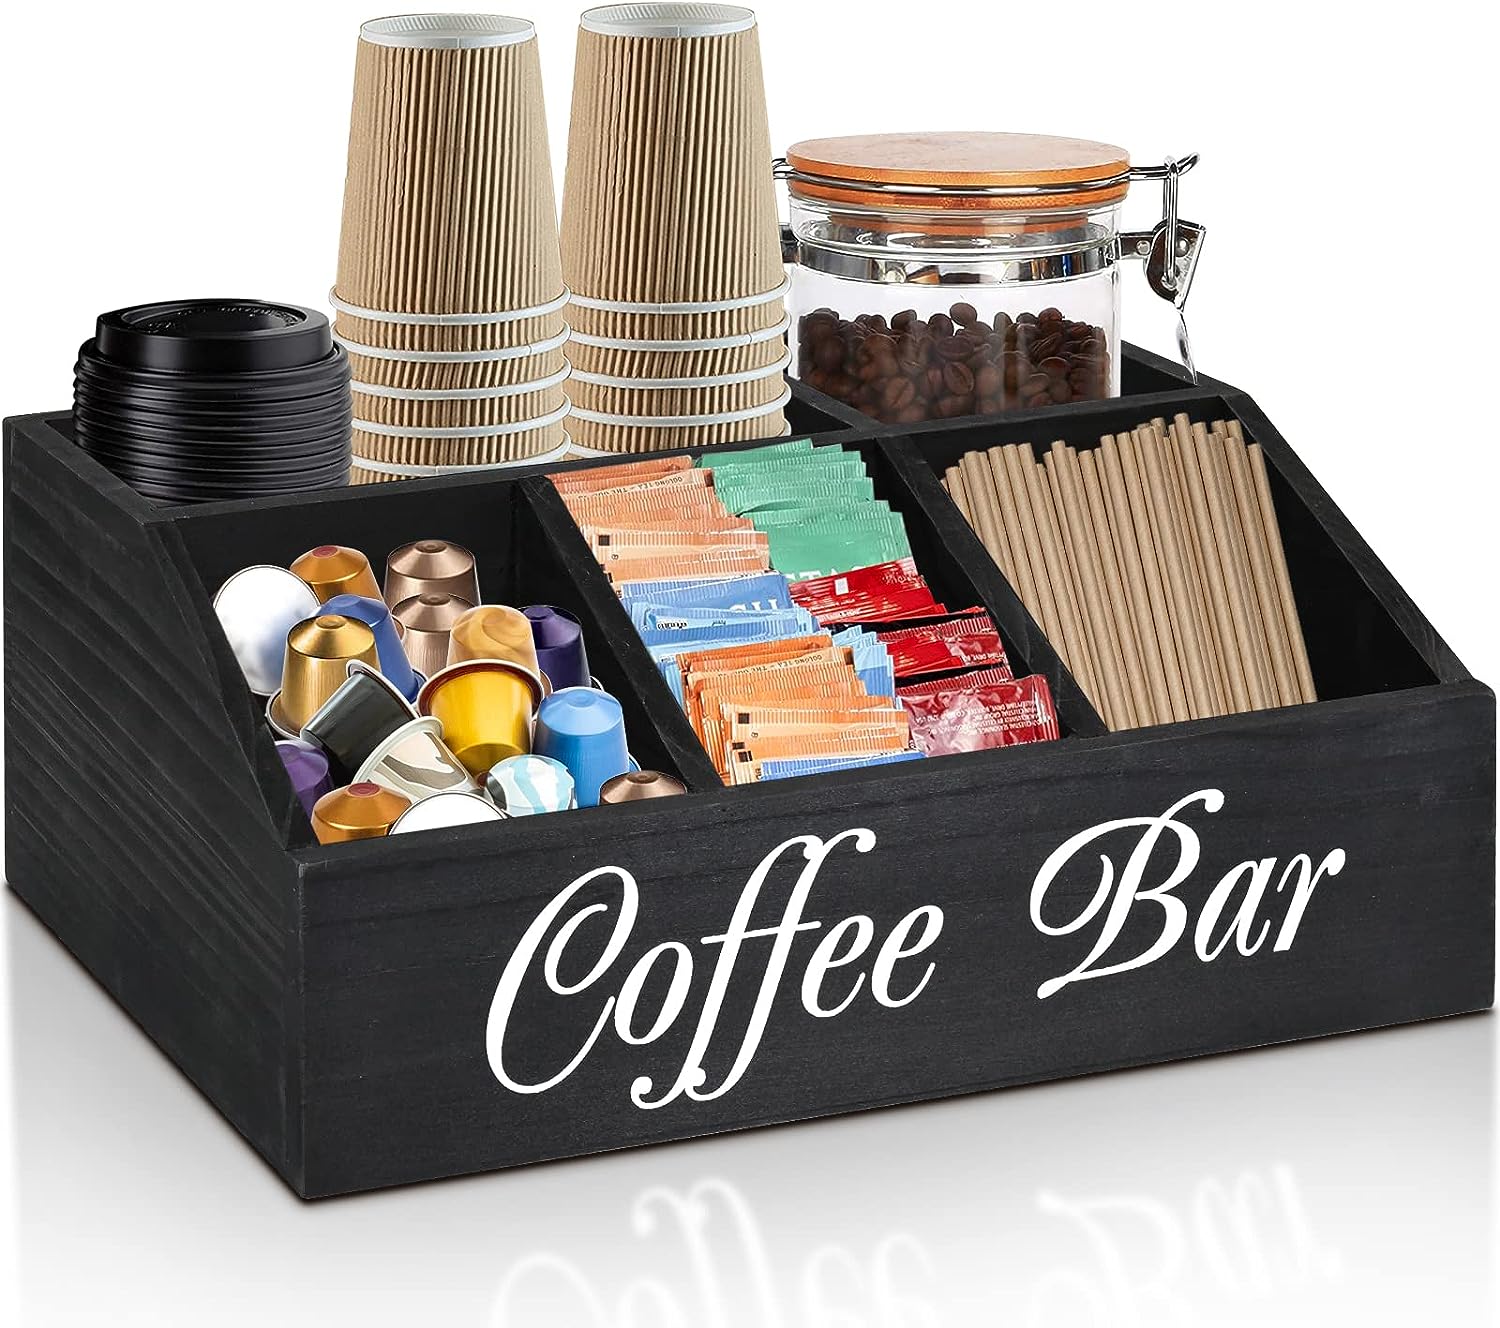 Coffee Station Organizer for Counter, Wood Coffee Pods Holder Storage Basket, Coffee and Tea Condiment Storage Organizer, Rustic Coffee Bar Decor for Coffee Accessories Organizer